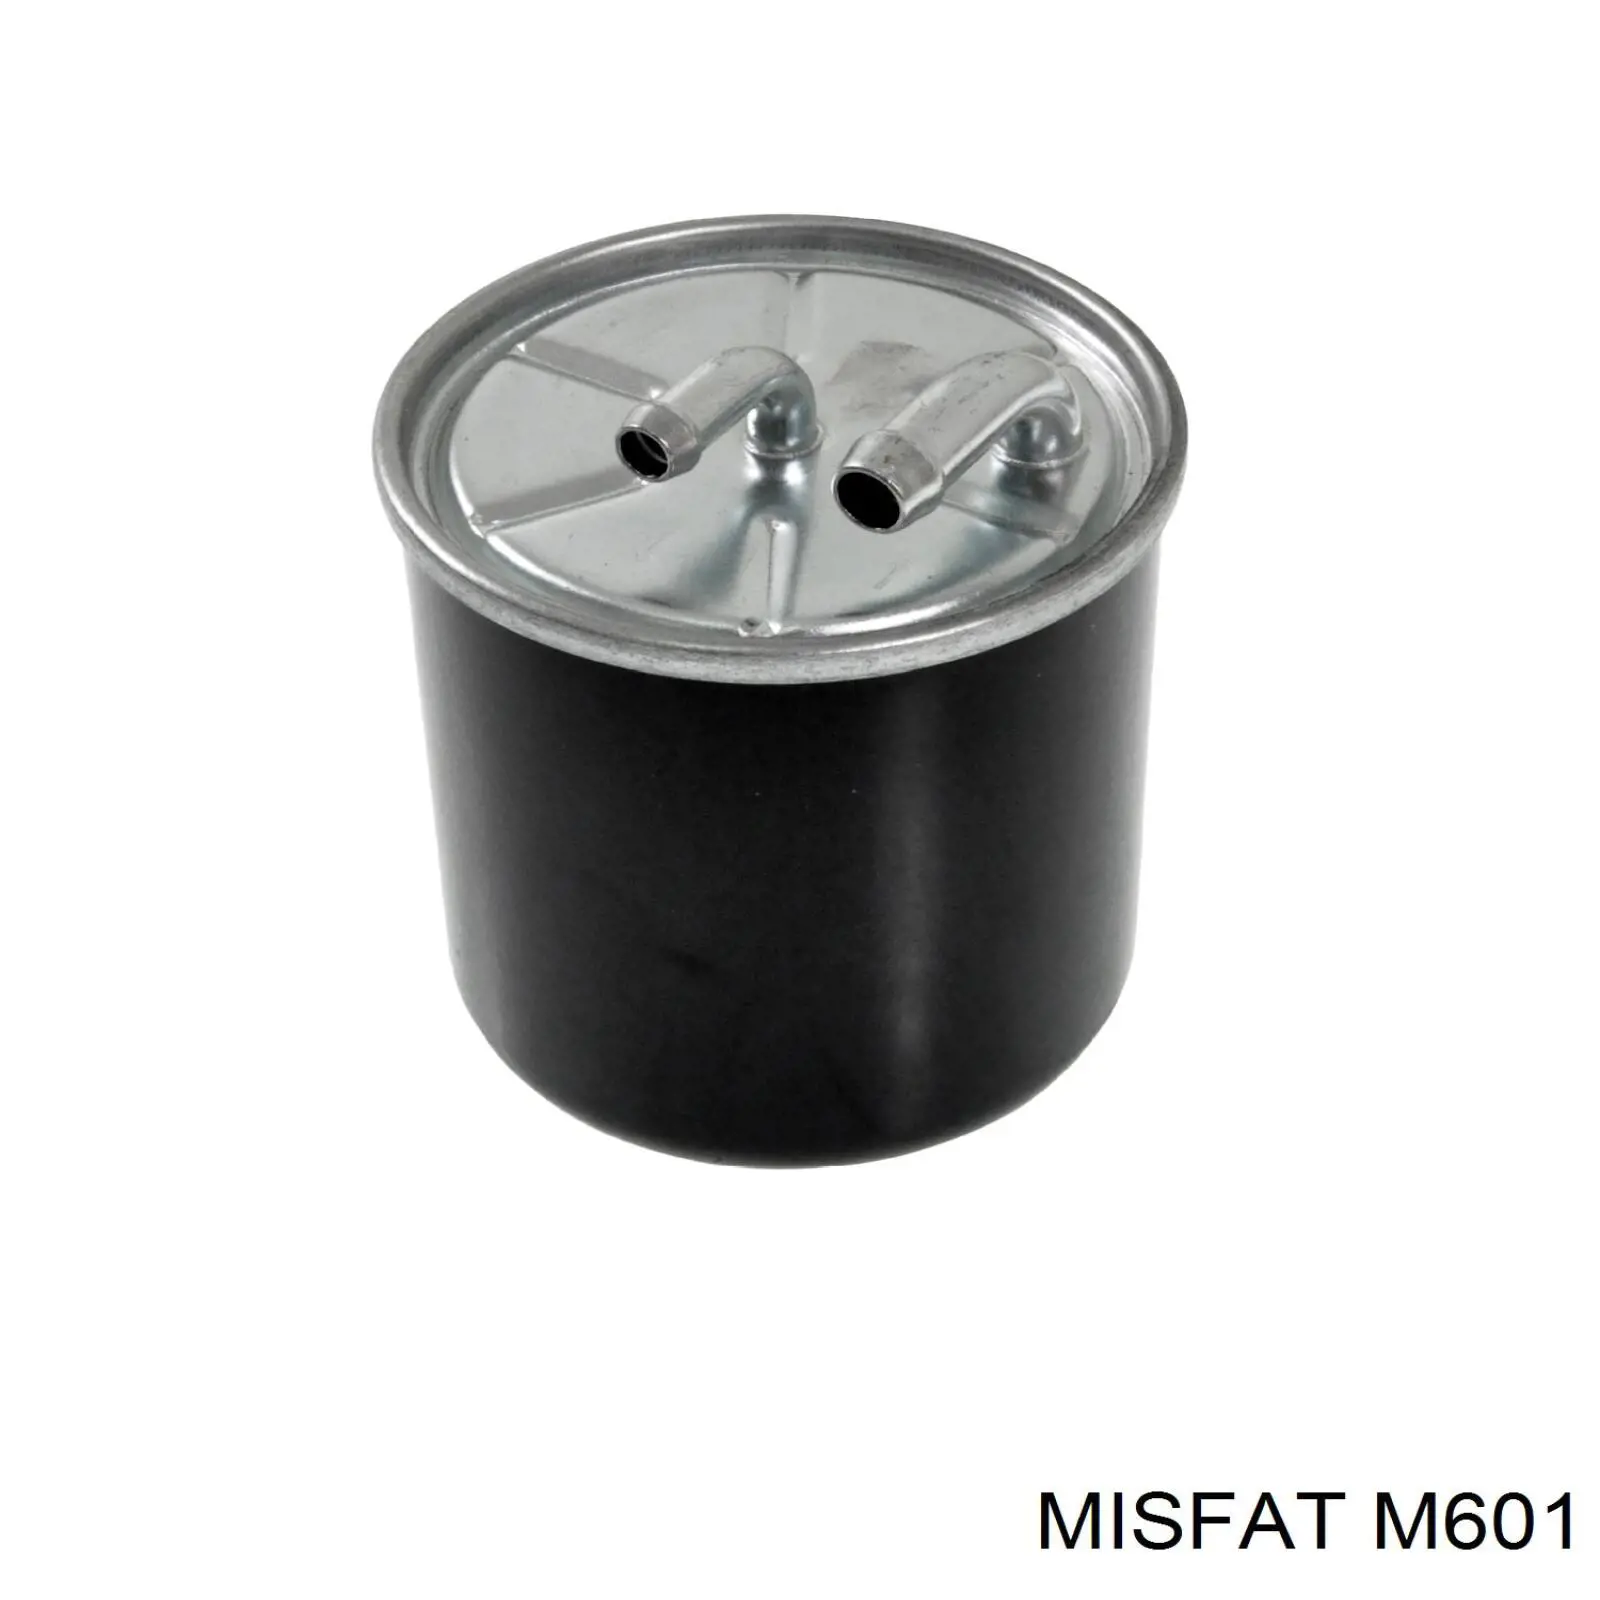 M601 Misfat filtro combustible